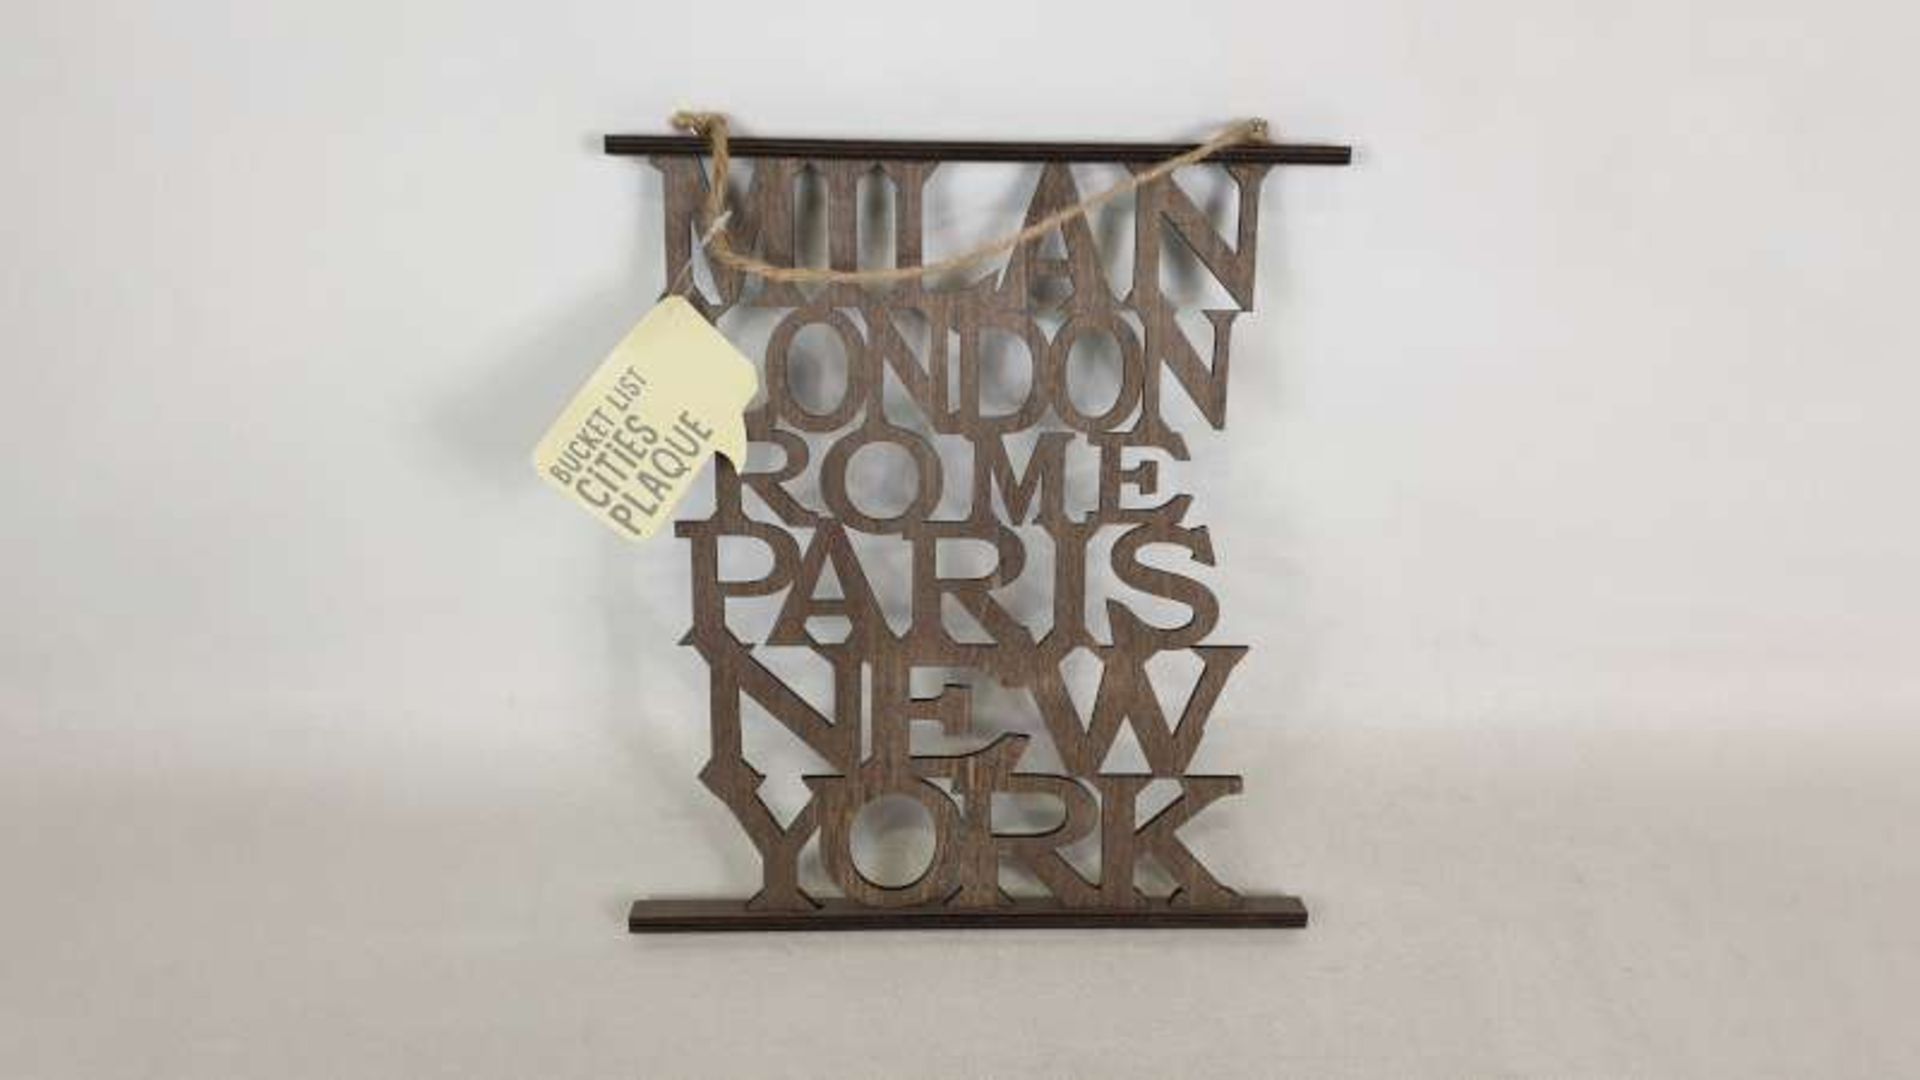 96 X CITIES HANGING PLAQUES IN 4 BOXES